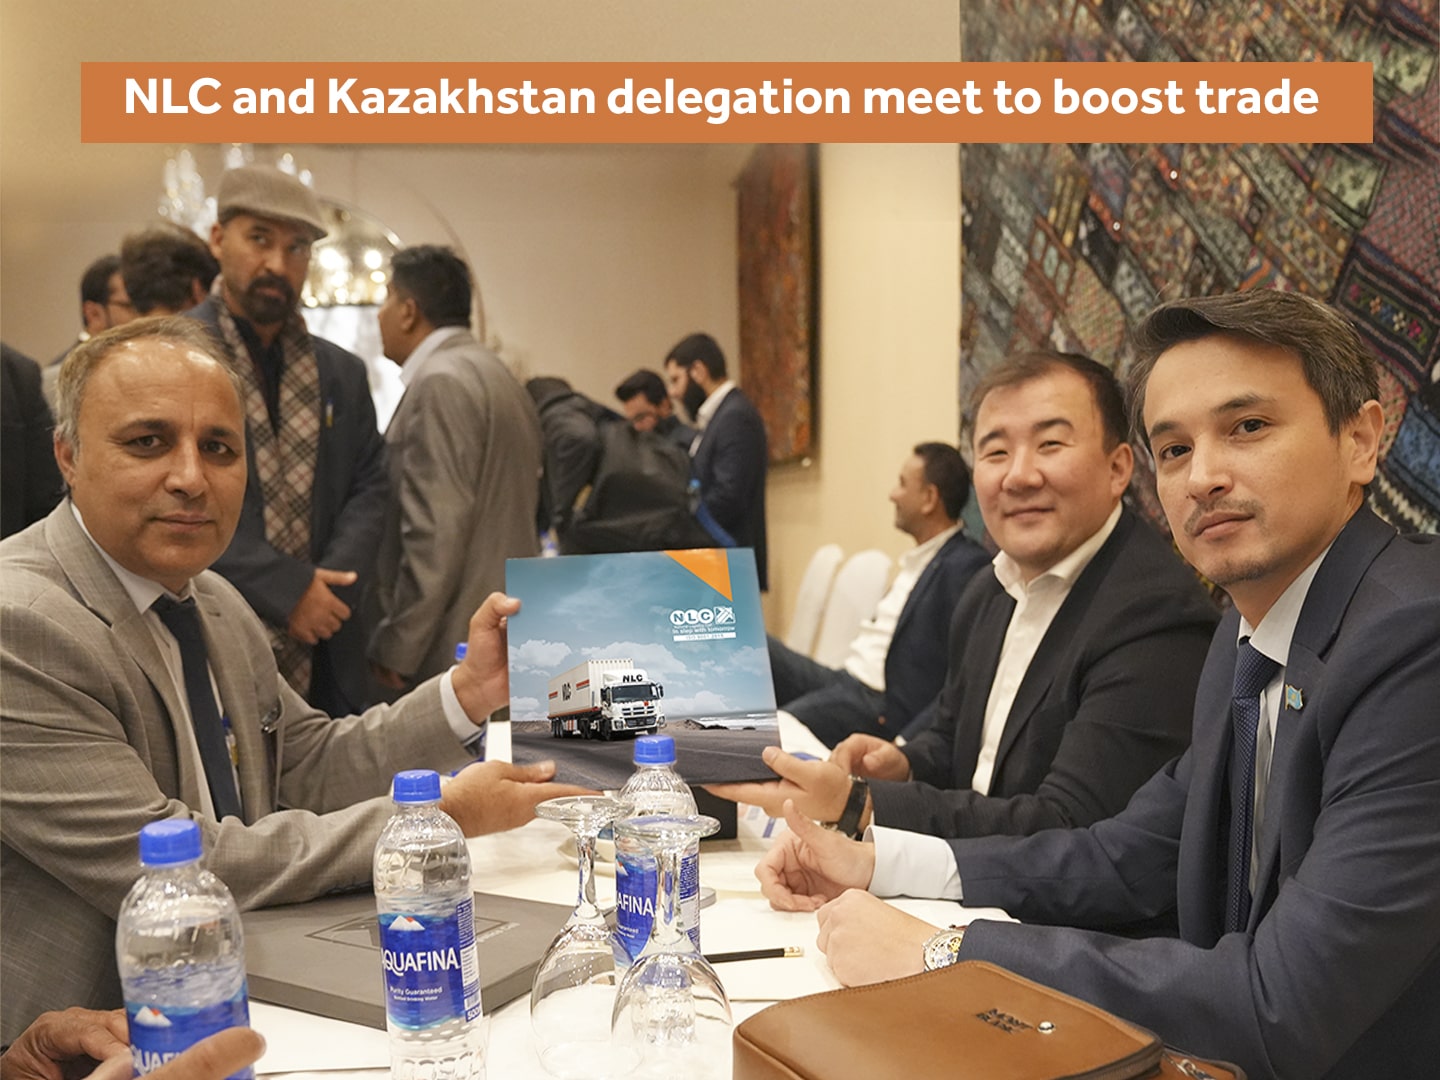 NLC and Kazakhstan delegation meet to boost trade